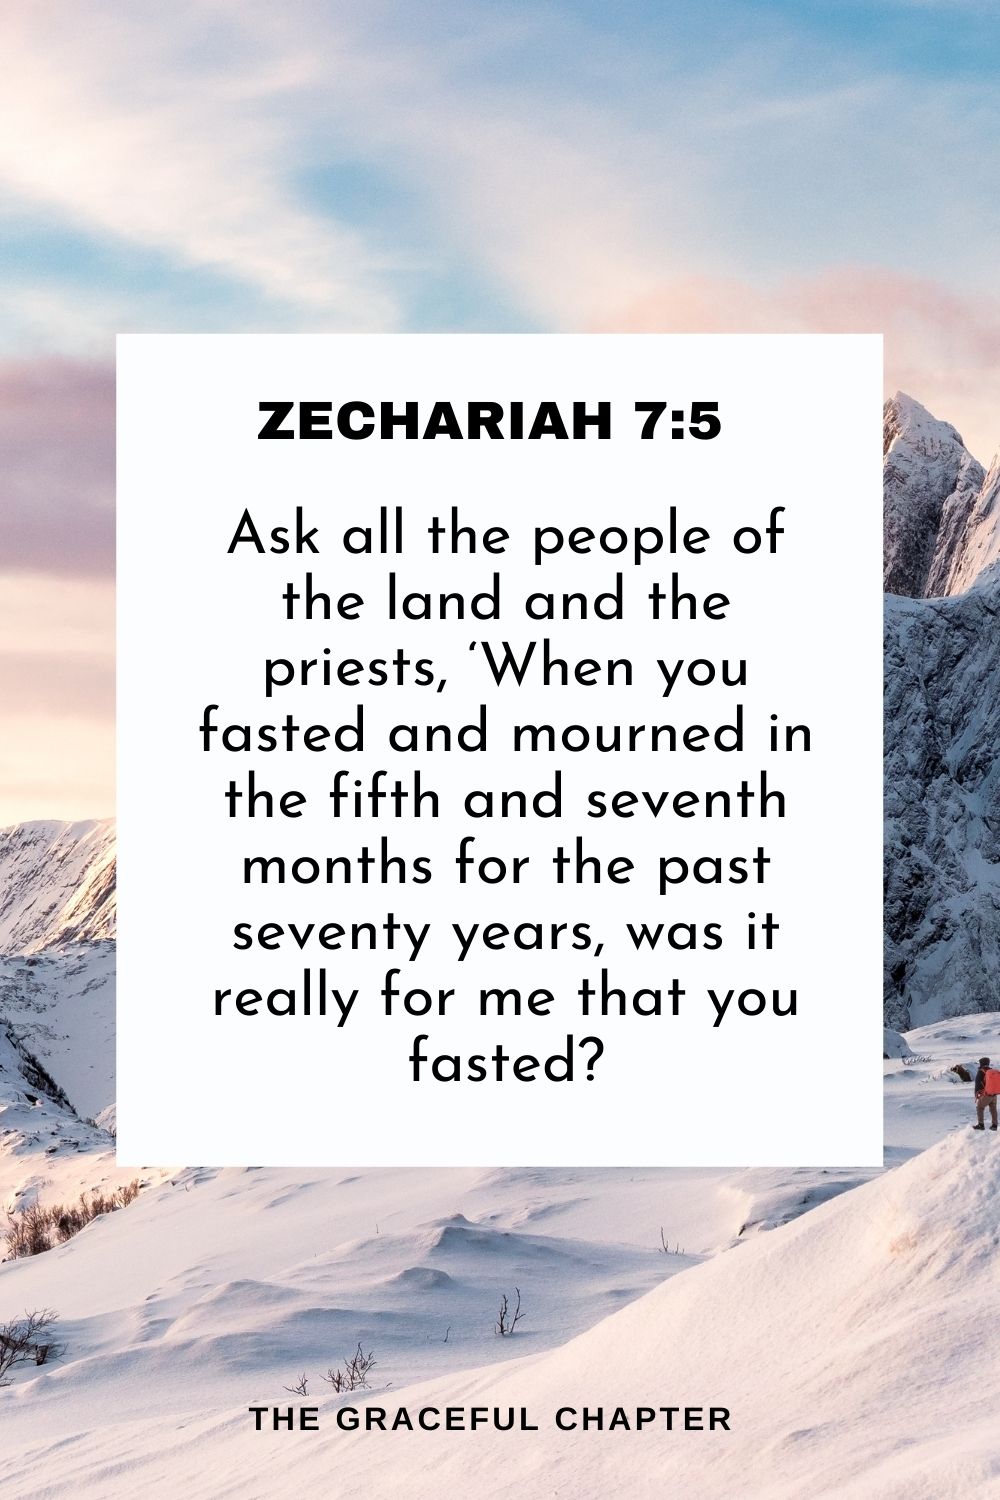 Ask all the people of the land and the priests, ‘When you fasted and mourned in the fifth and seventh months for the past seventy years, was it really for me that you fasted? Zechariah 7:5